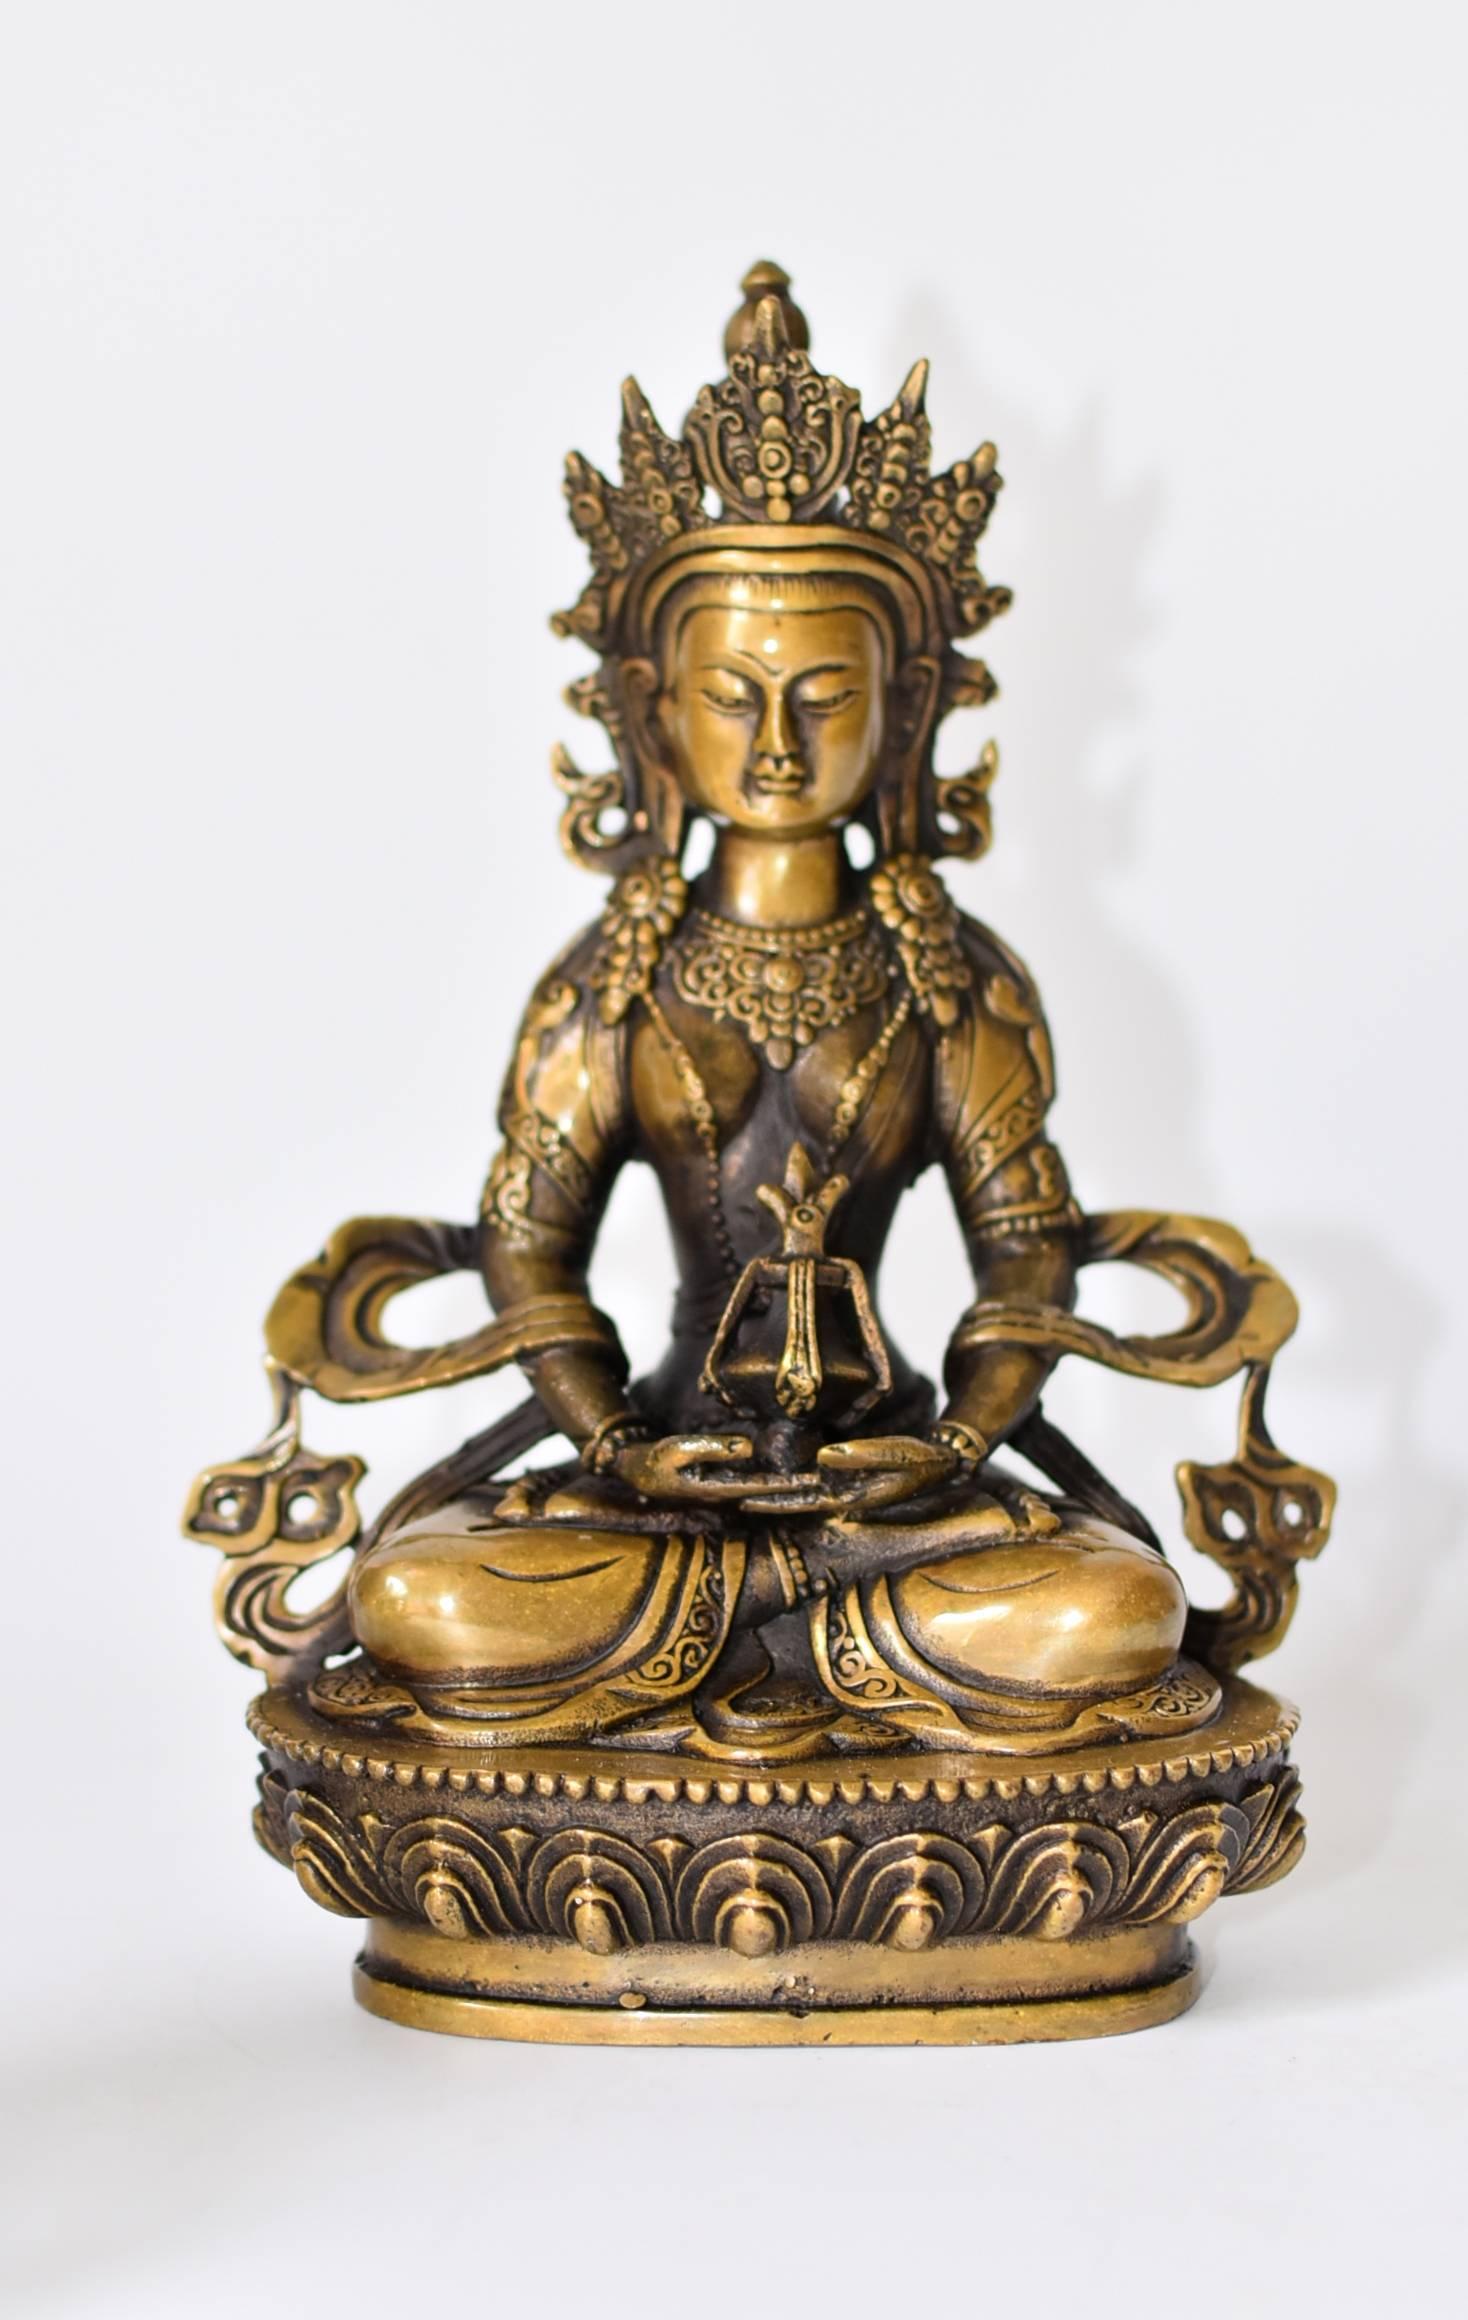 A spectacular collection featuring three Tibetan Buddhas. Manjushri, the Bodhisattva of Wisdom, holds a sword in one hand, to cut off all delusion. A book of Prajnaparamita Wisdom text is in the flowers to his left. Prajnaparamita (Perfection of